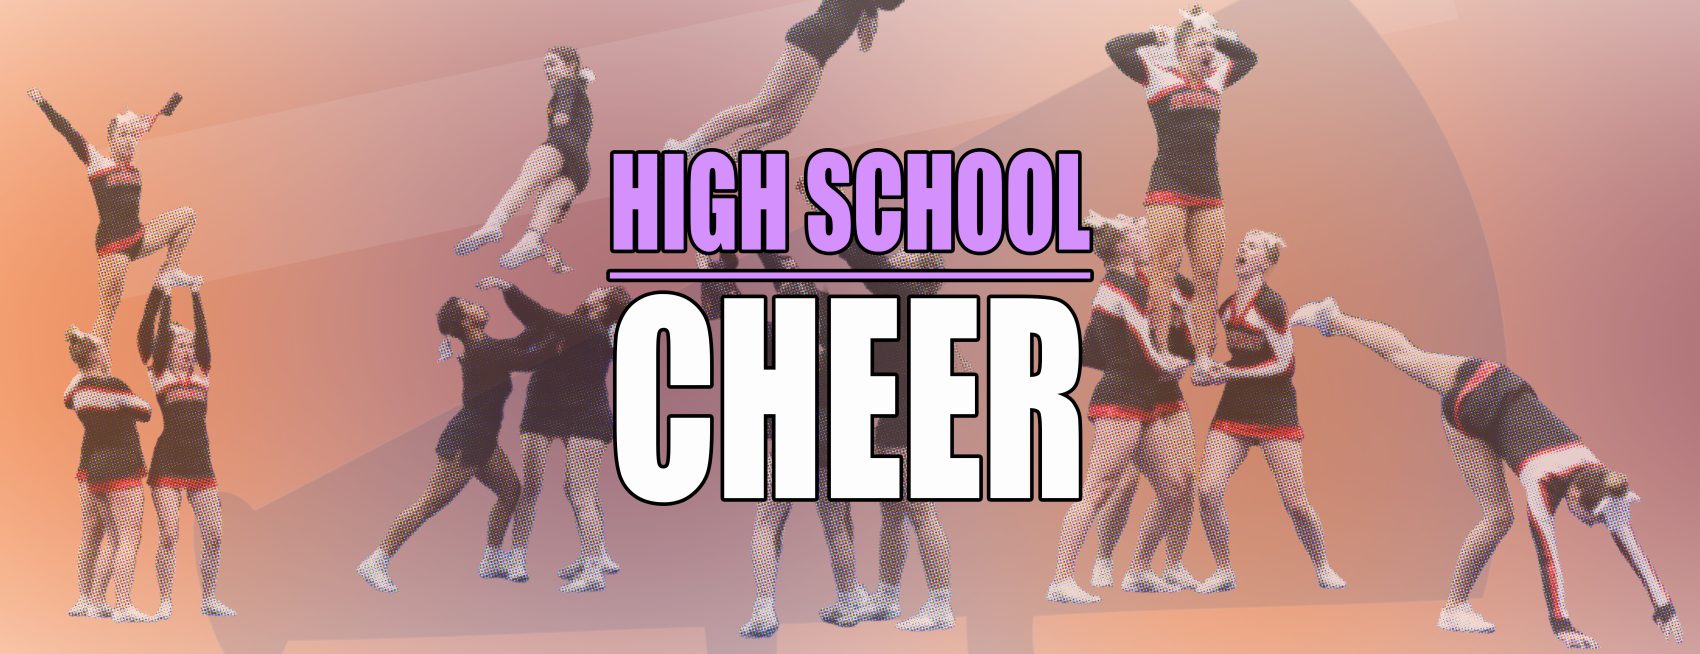 Host Reeths-Puffer claims second in competitive cheer meet